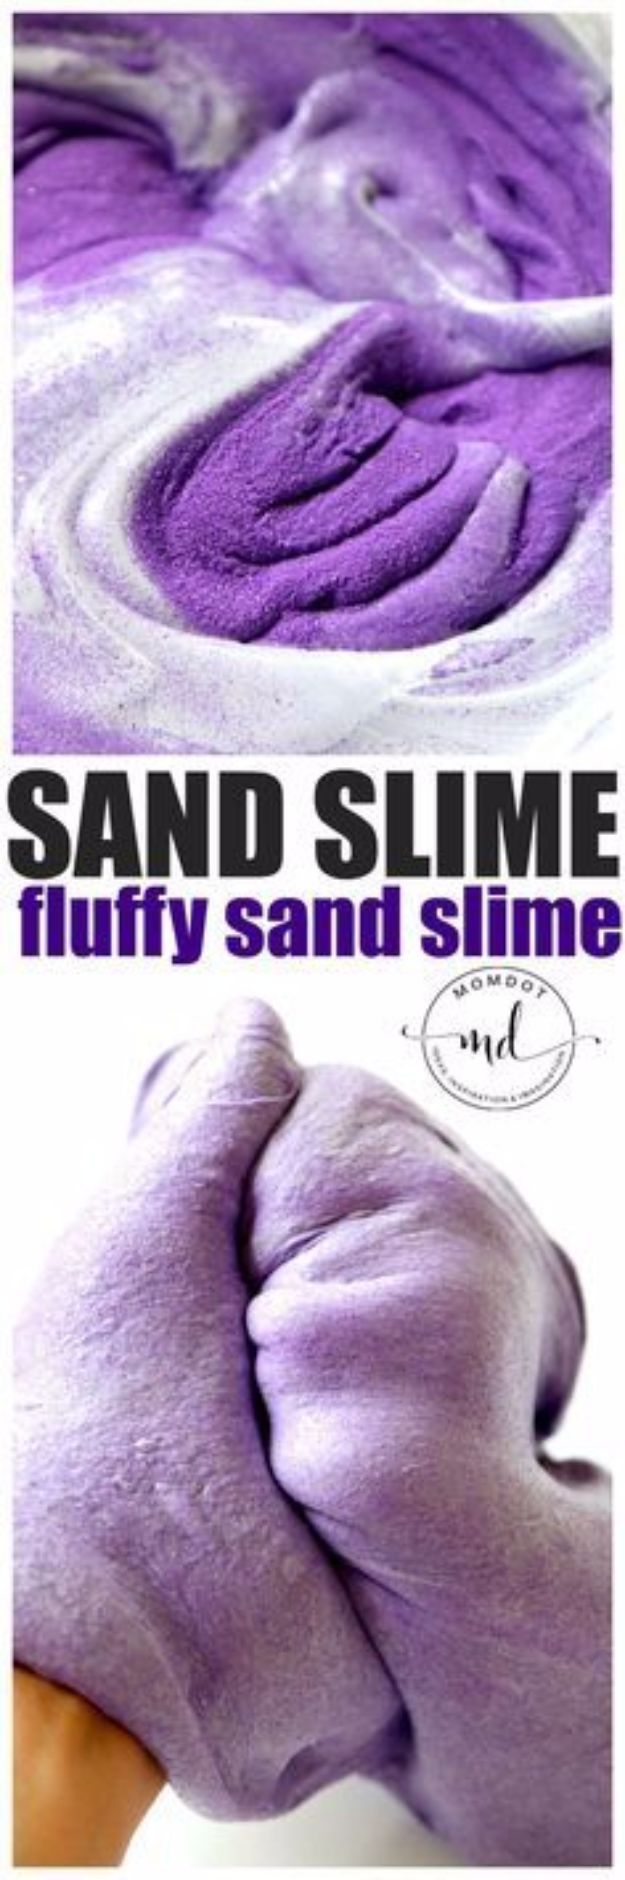 Best DIY Slime Recipes -Fluffy Sand Slime - Cool and Easy Slime Recipe and Tutorials - Ideas Without Glue, Without Borax, For Kids, With Liquid Starch, Cornstarch and Laundry Detergent - How to Make Slime at Home - Fun Crafts and DIY Projects for Teens, Kids, Teenagers and Teens - Galaxy and Glitter Slime, Edible Slime, Rainbow Colored Slime, Shaving Cream recipes and more fun crafts and slimes #slimerecipes #slime #diyslime #teencrafts